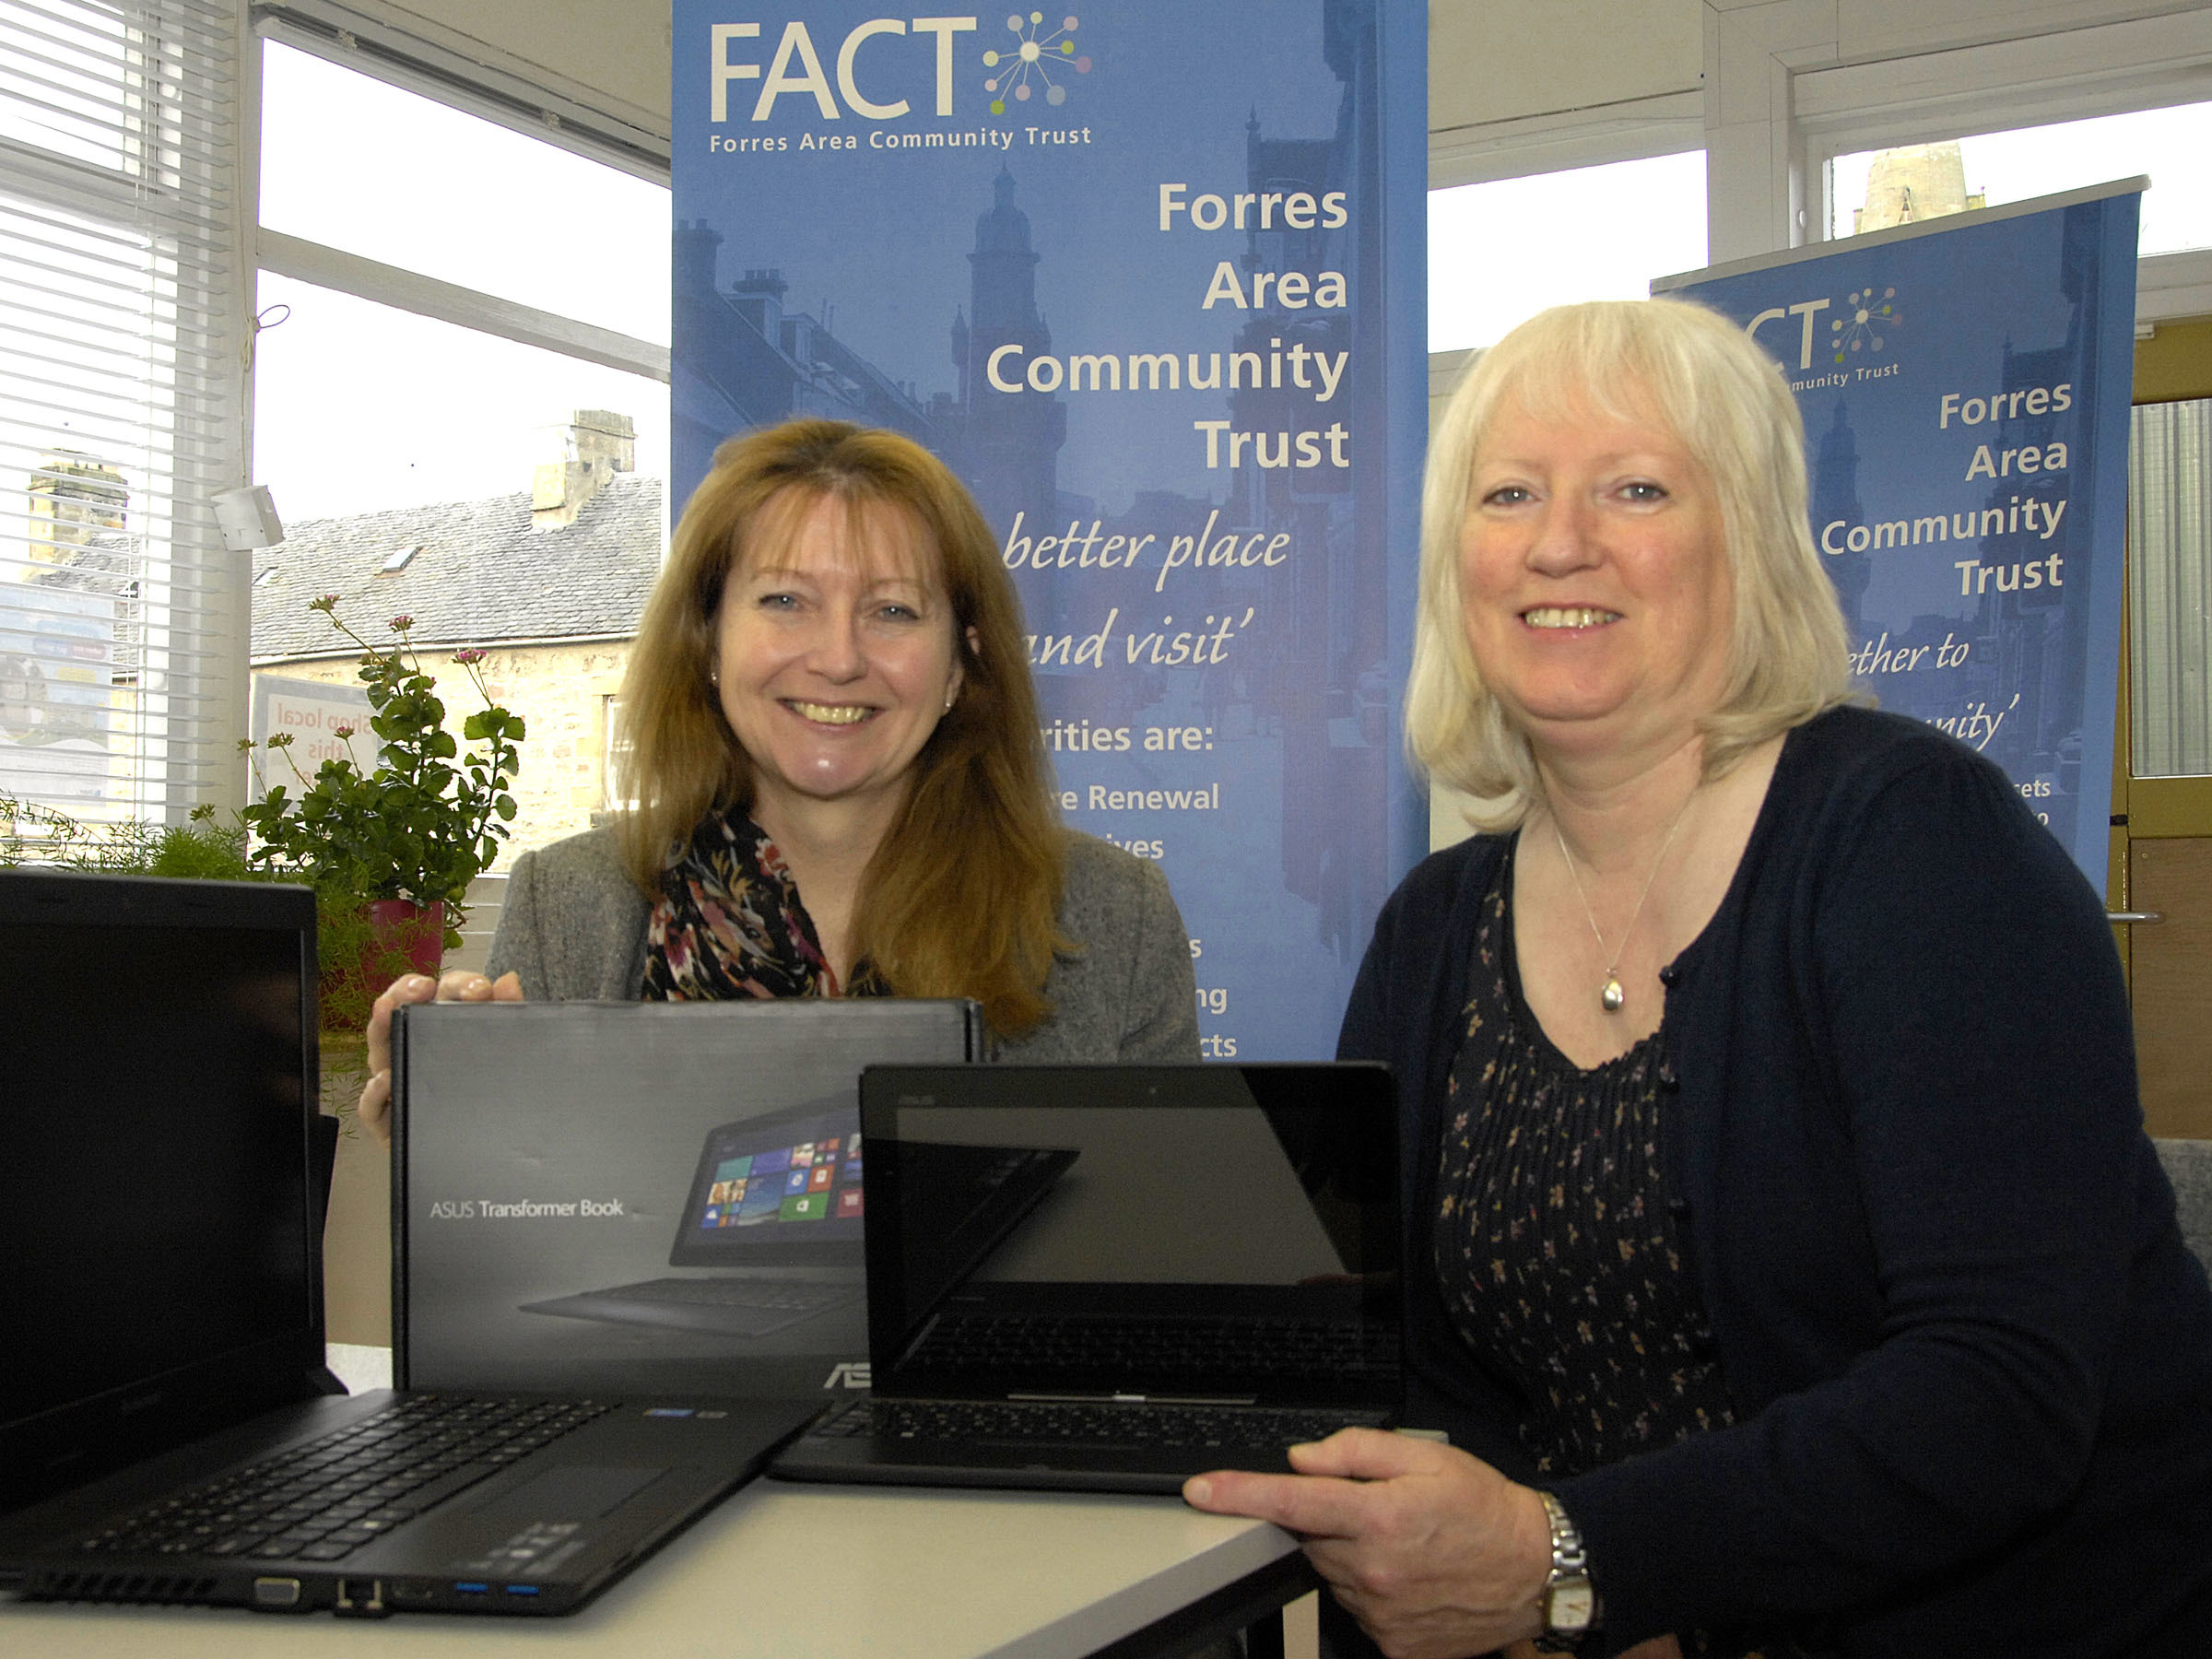 Rosemary Pannell (L) of the Moray Council, Presents I.T equipment to Frances Powell (R) Development Officer for the Forres Area Community Trust